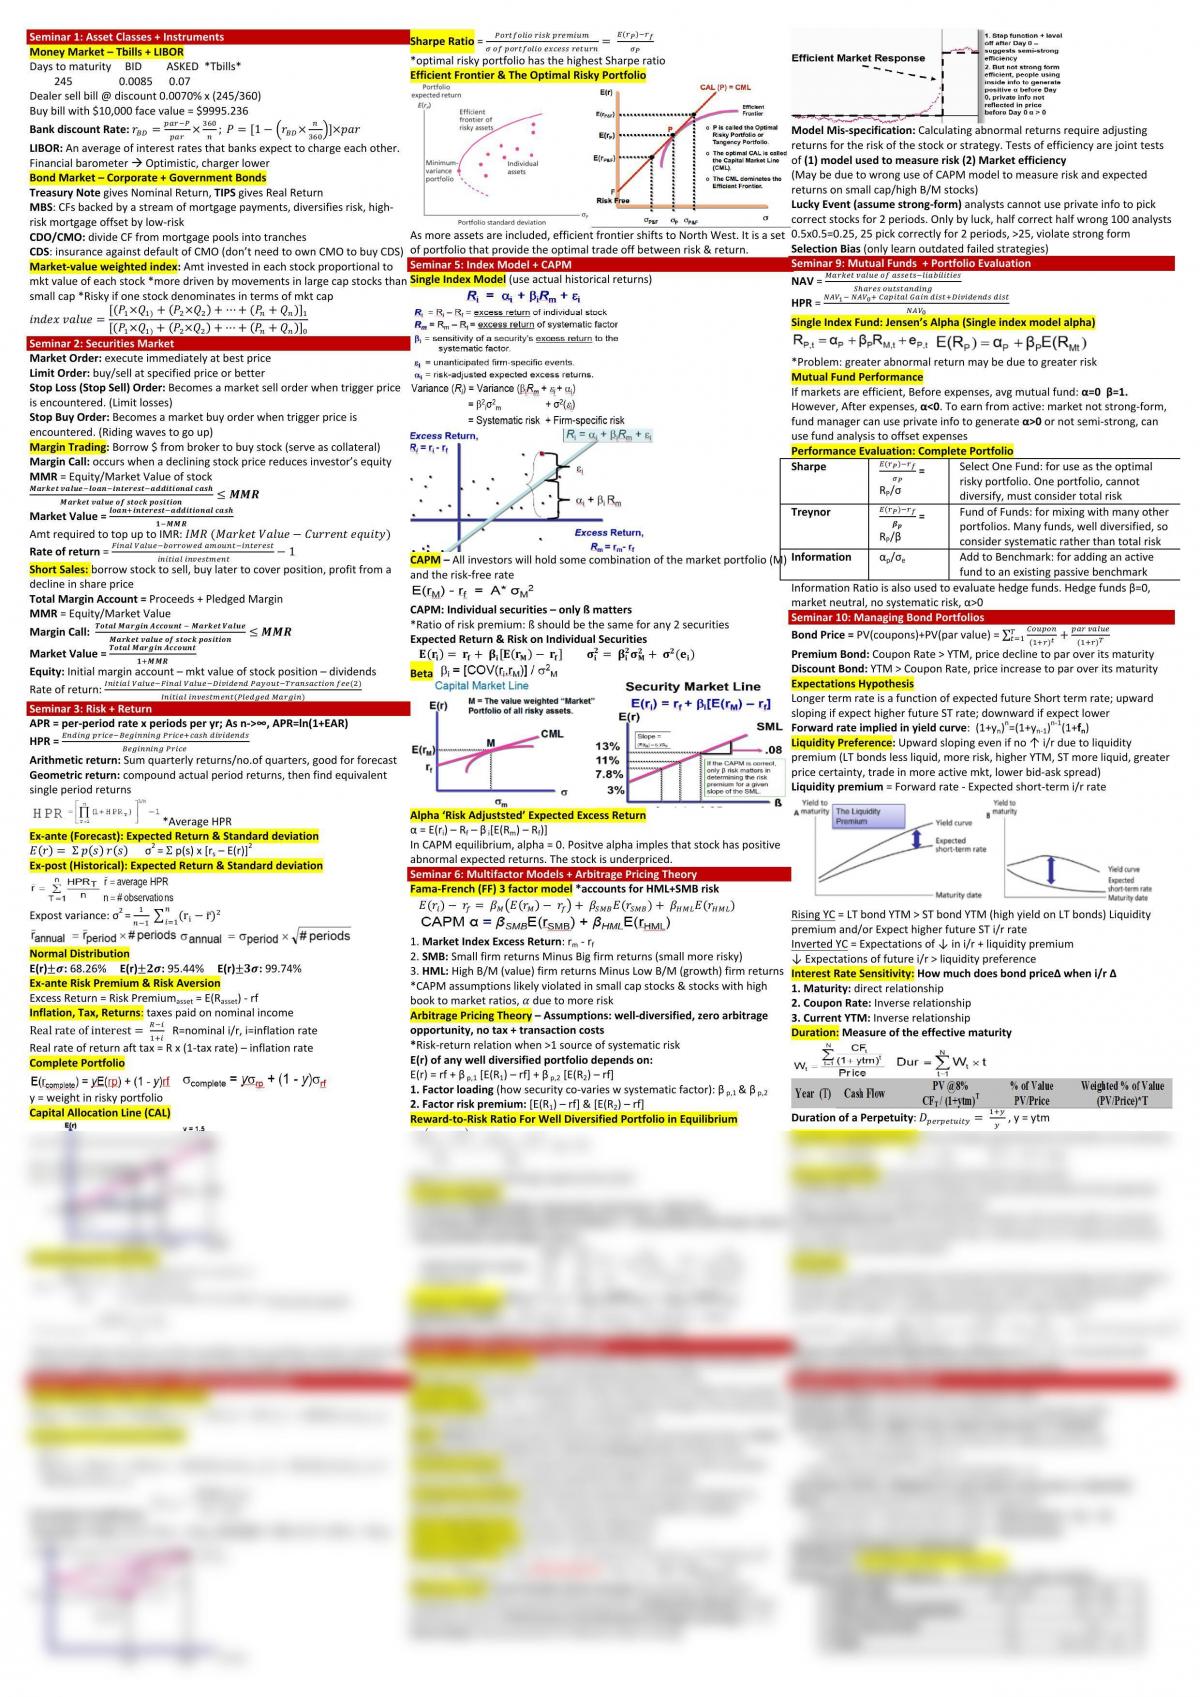 Investments Cheatsheet - Page 1